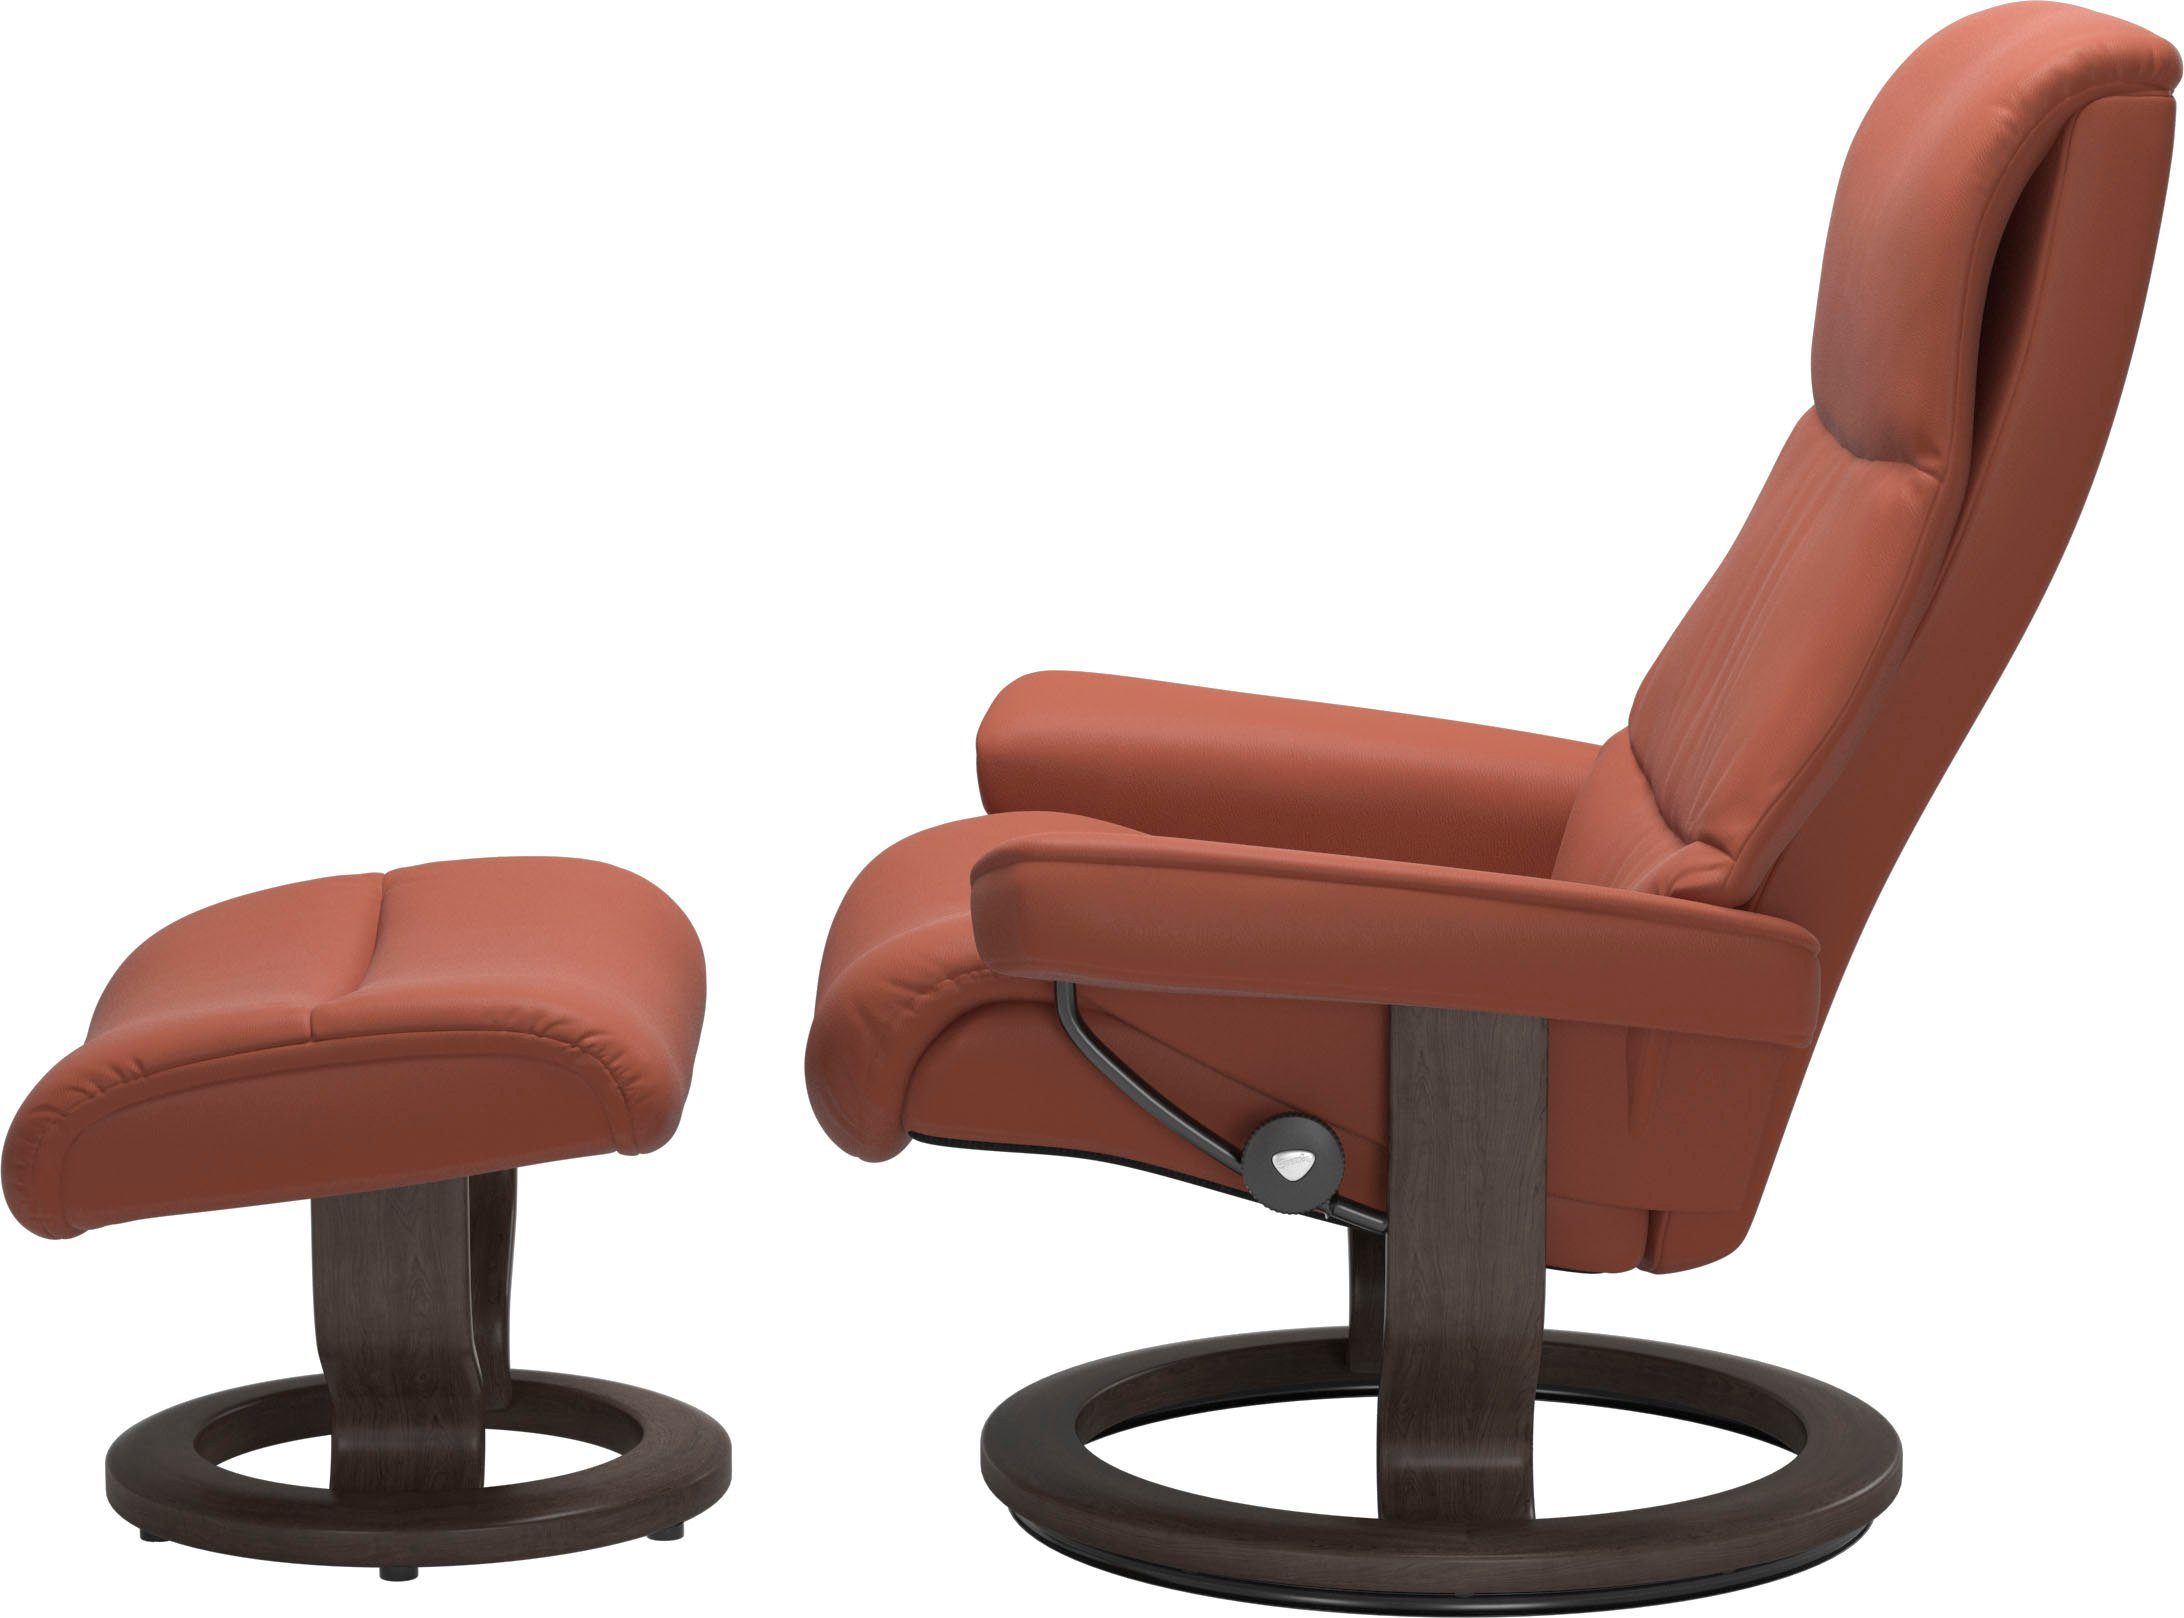 S,Gestell Classic View, Größe Wenge mit Relaxsessel Base, Stressless®